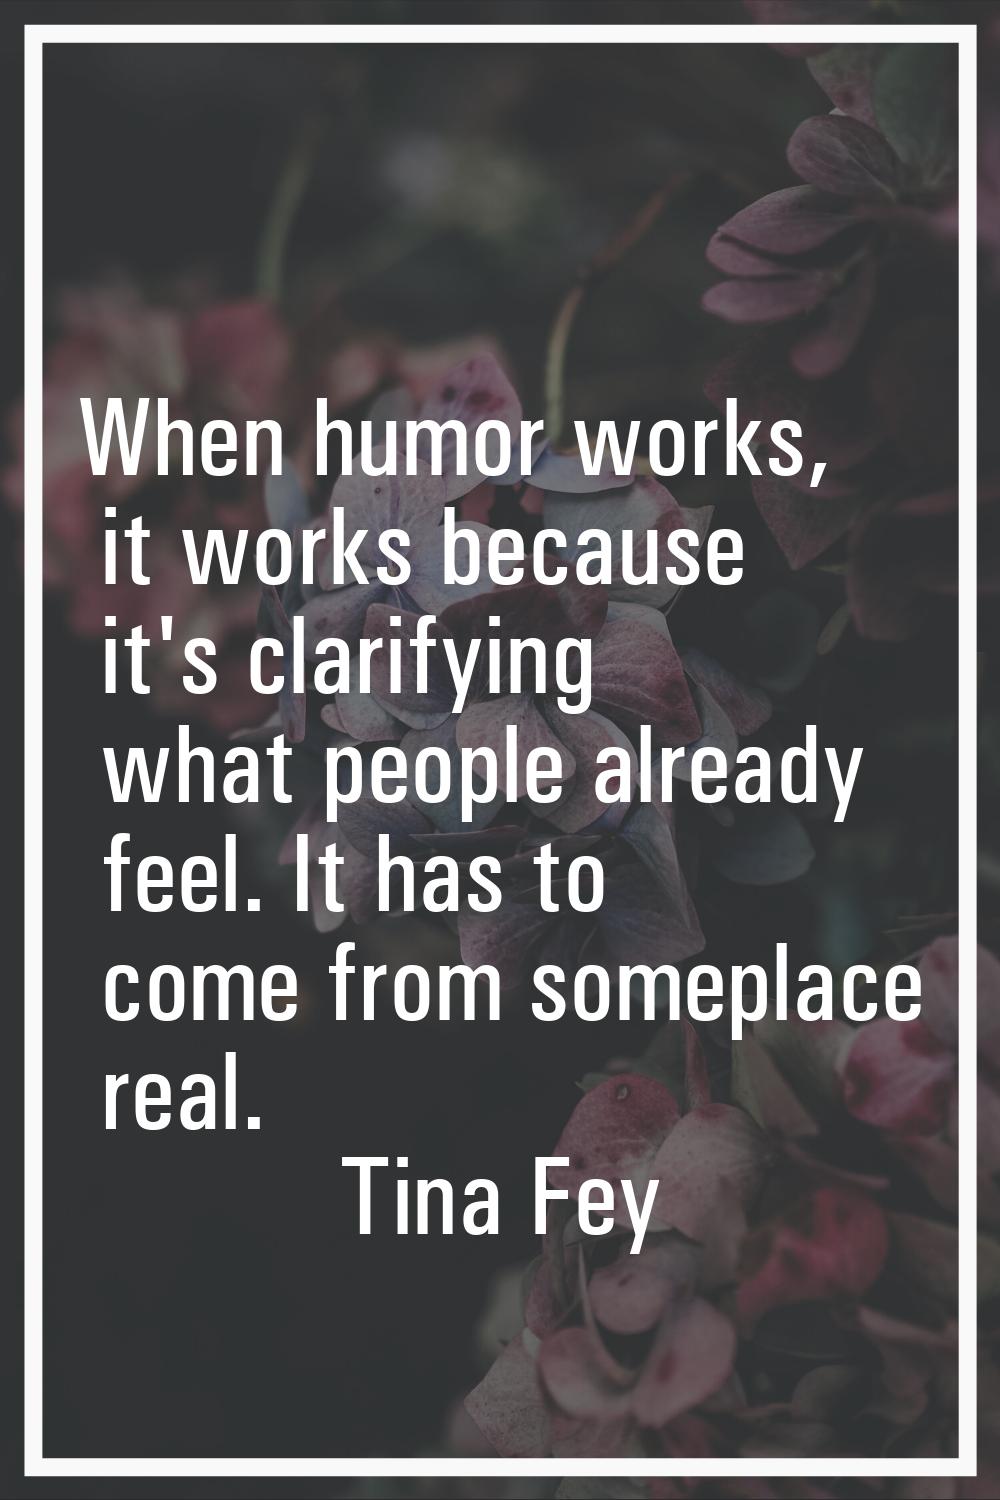 When humor works, it works because it's clarifying what people already feel. It has to come from so